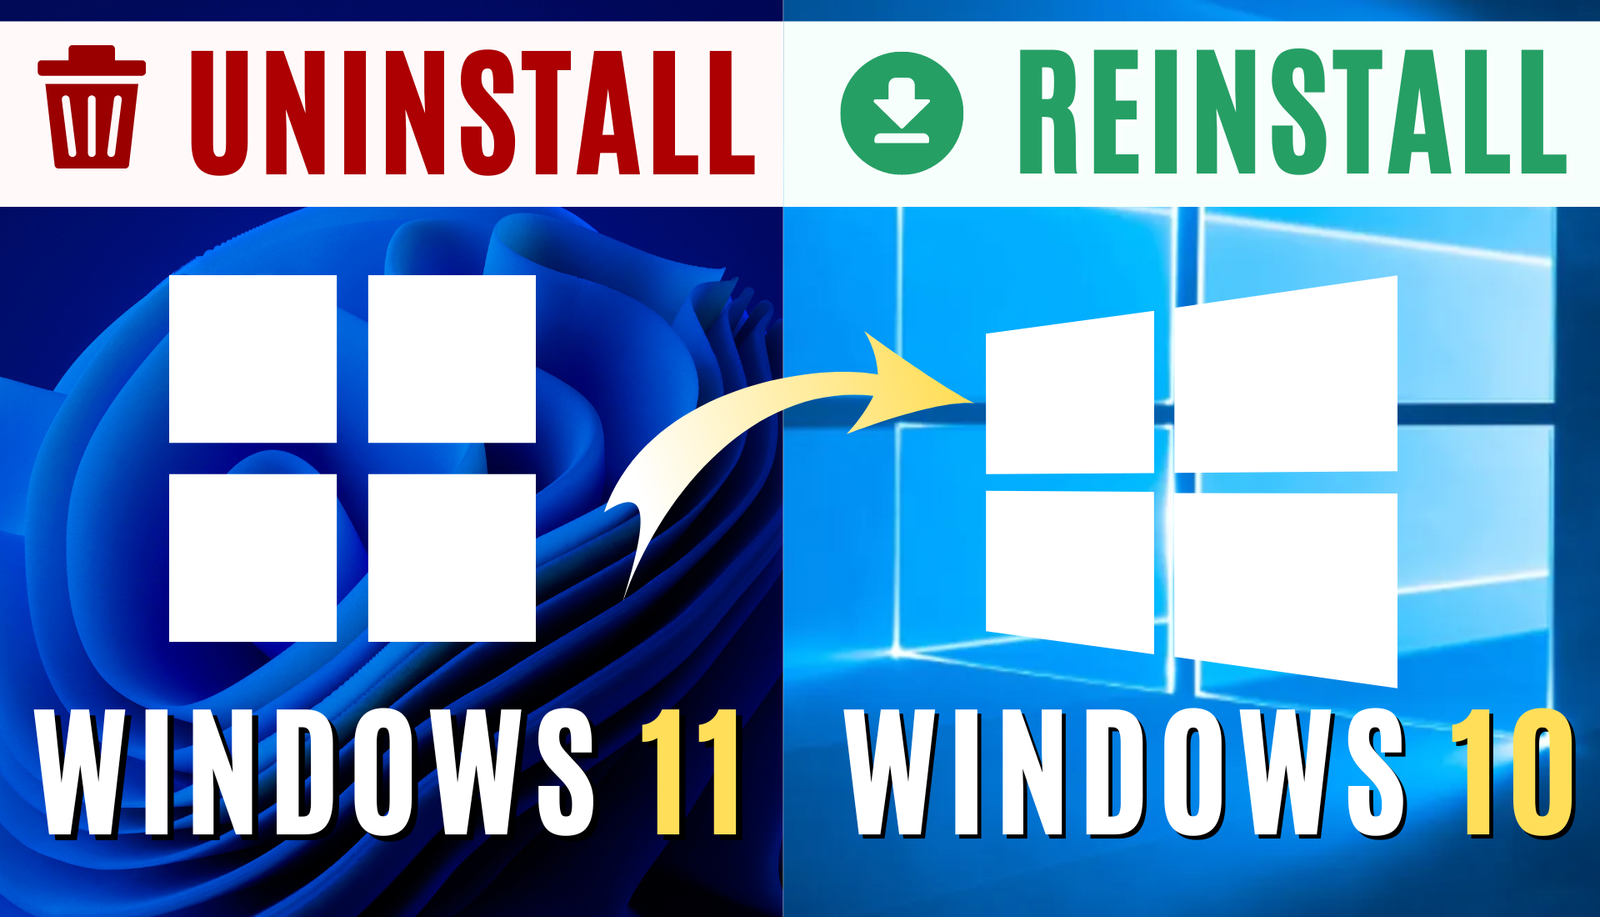 How to Uninstall Windows 11 to Windows 10 (Go Back, Reinstall, Recover, Roll Back)